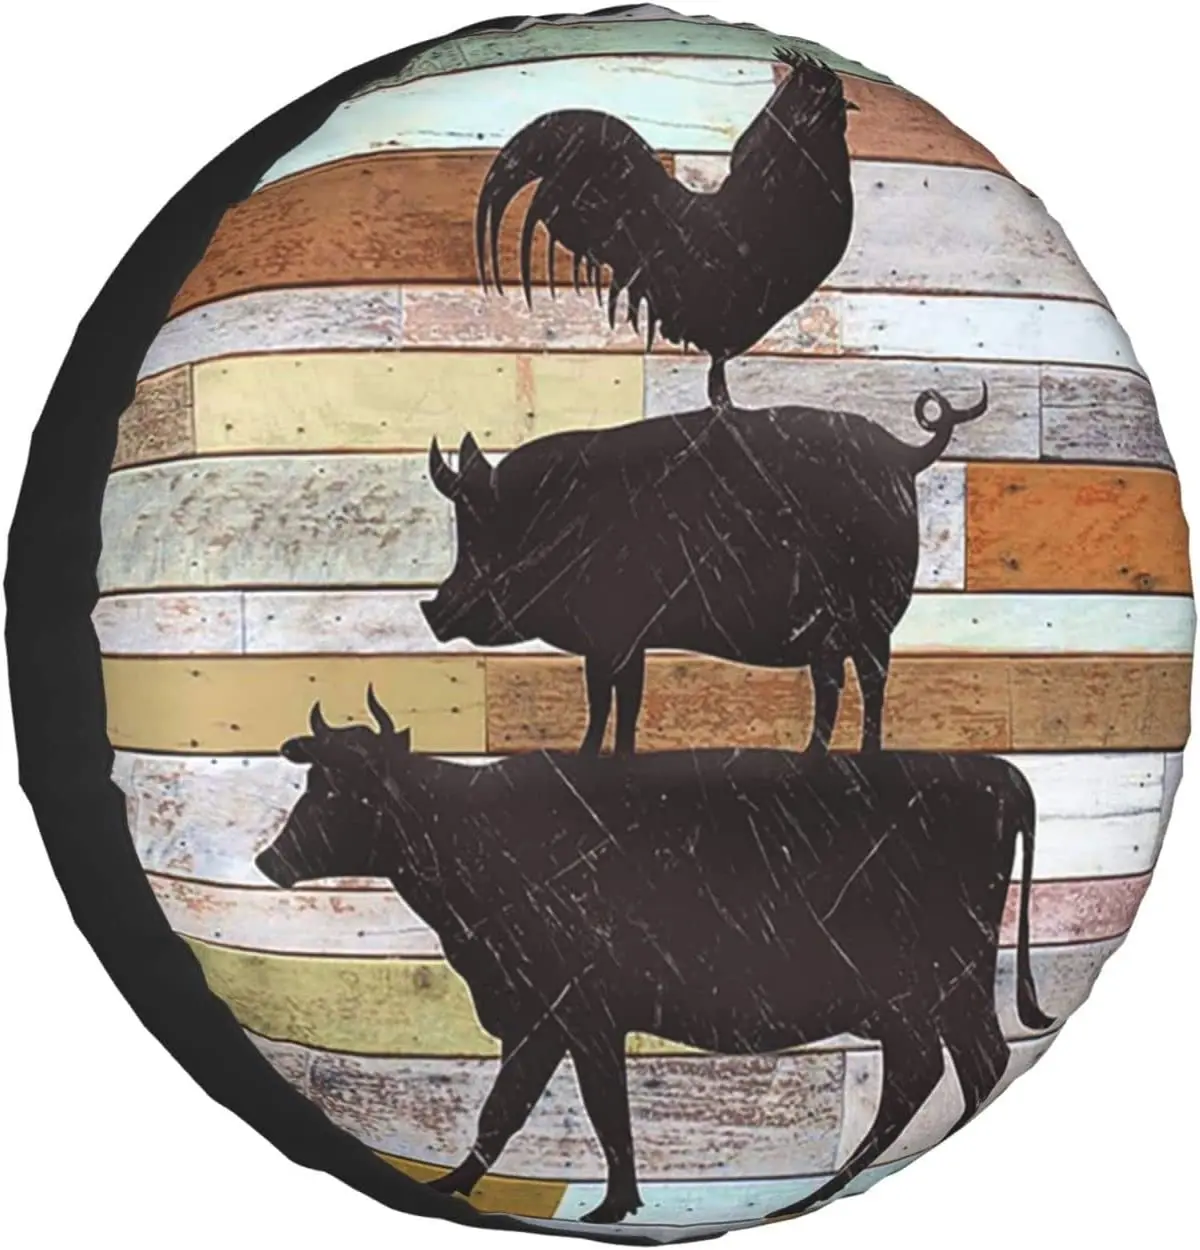 

Cow Chicken and Pig Pattern Spare Tires Cover, Wheel Covers, Trailer Tires, Wheel Protectors, Universal 14, 15, 16, 17 Inch